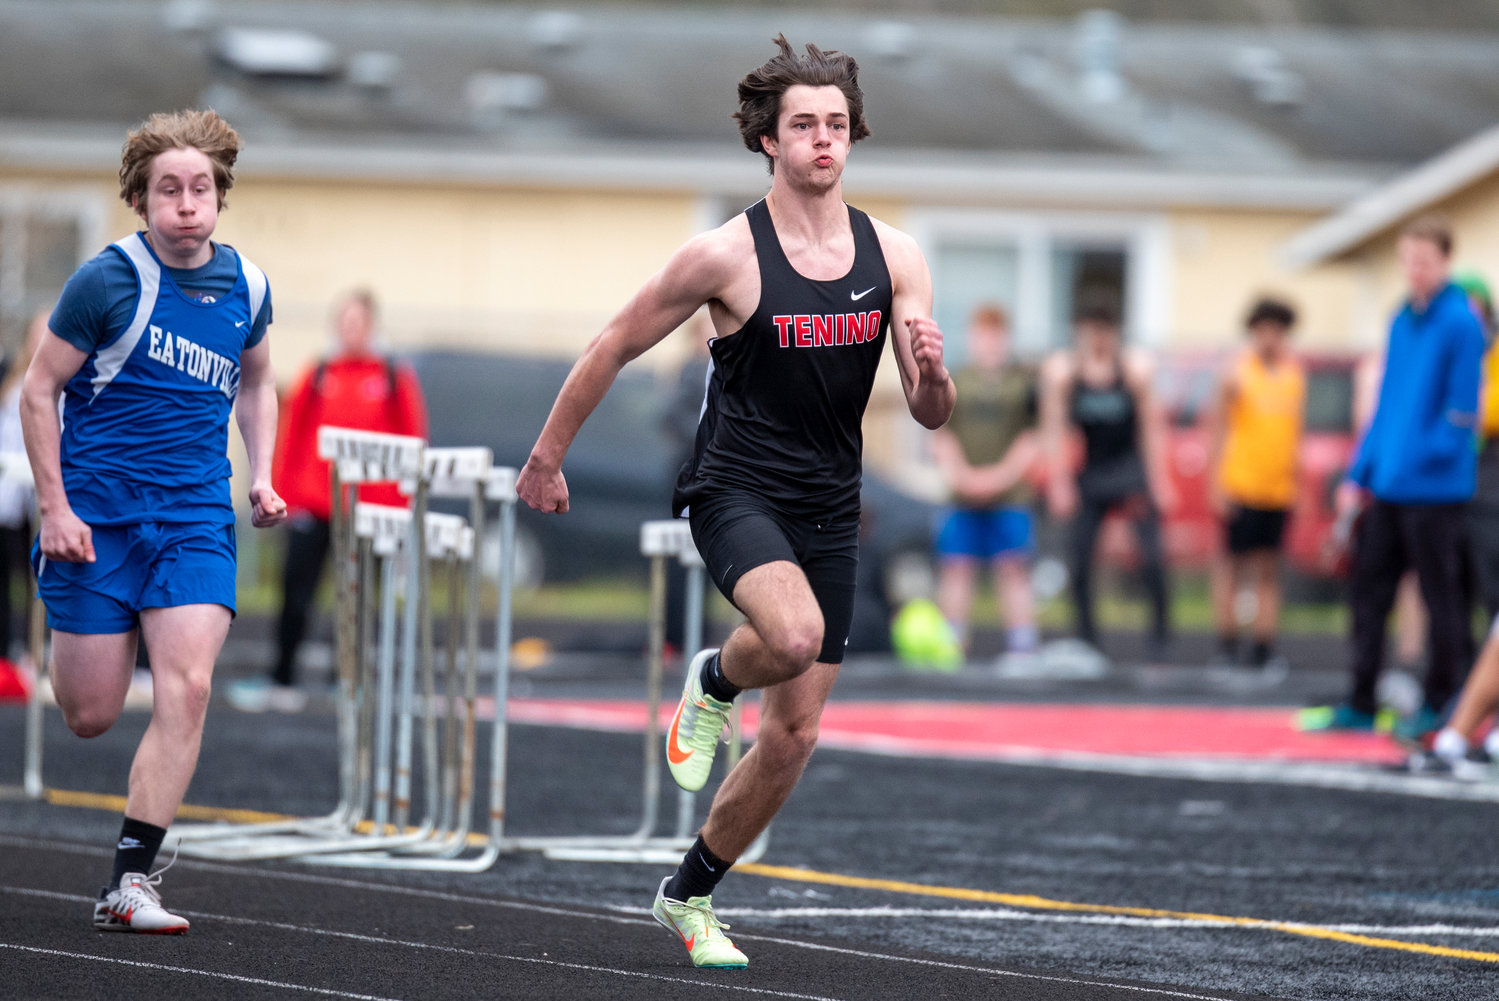 Tenino's Dylan Spicer takes off during the boys 100-meter dash at a home meet on March 29.